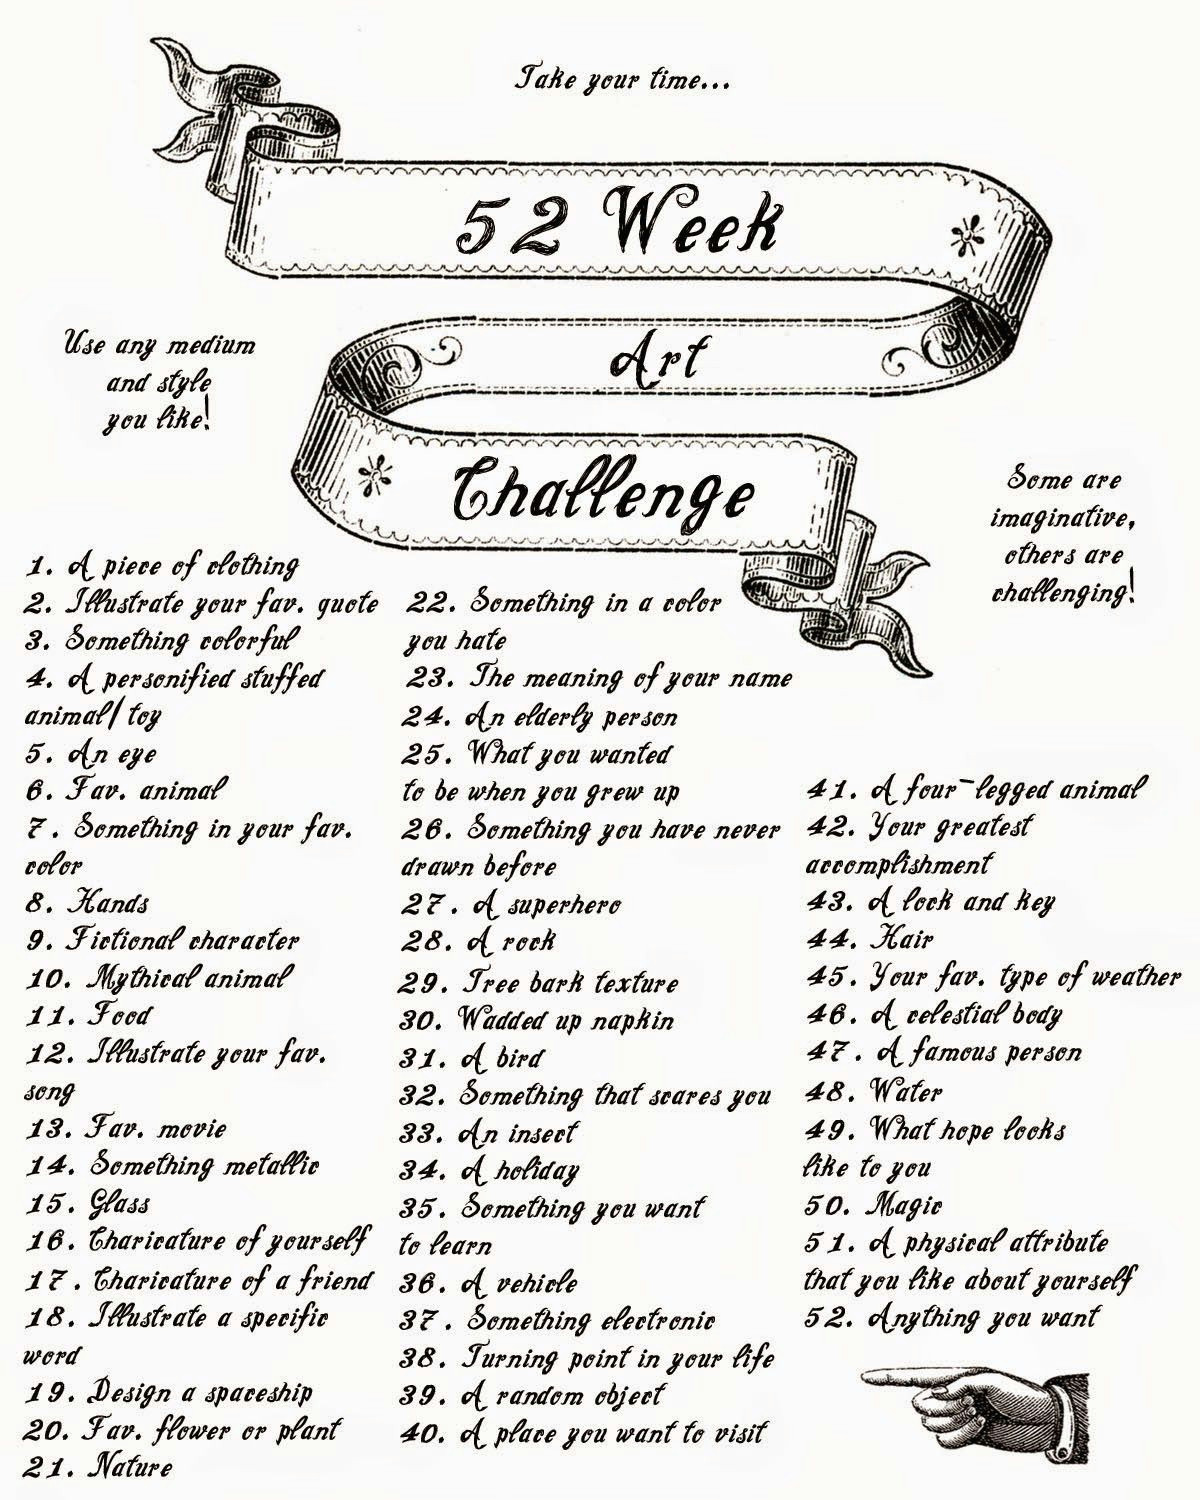 500 Drawing Ideas 52 Week Art Challenge the Starving Arts Painting Pinterest